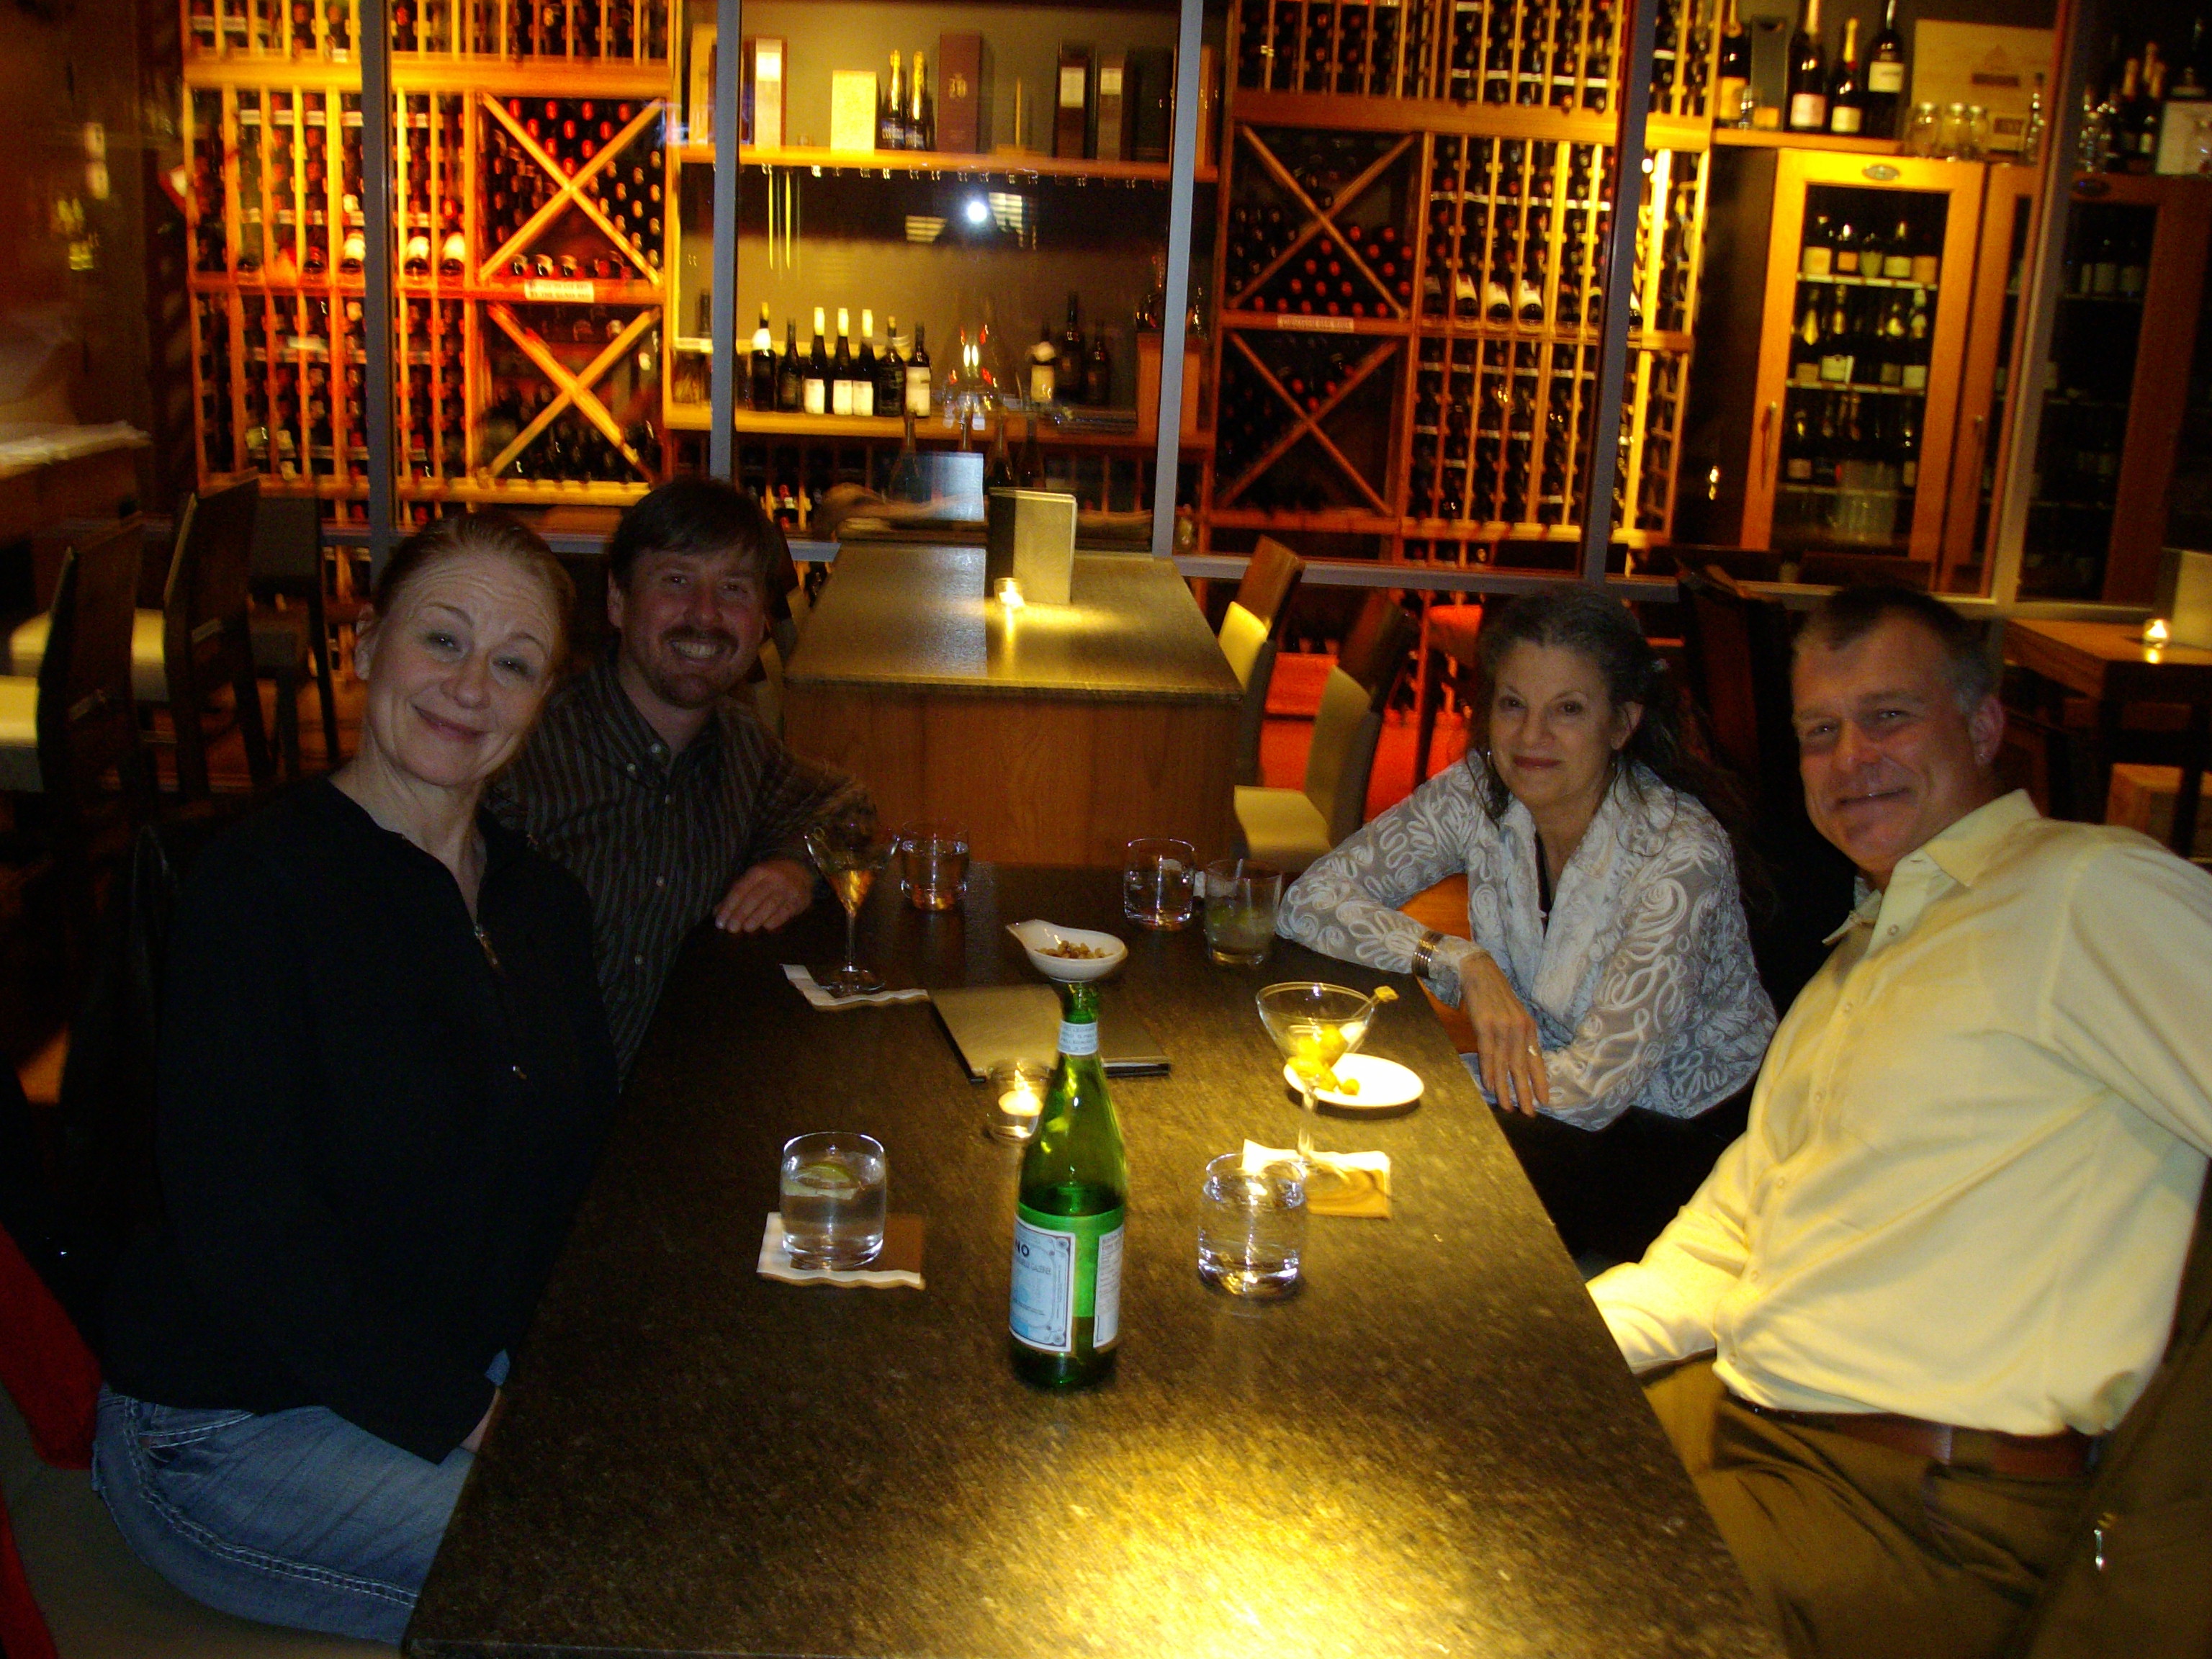 Left to Right: Anna Smith, Will Pritchard, Laura Agustin and Andy Sorfleet at Yew lounge at the Four Seasons, downtown Vancouver